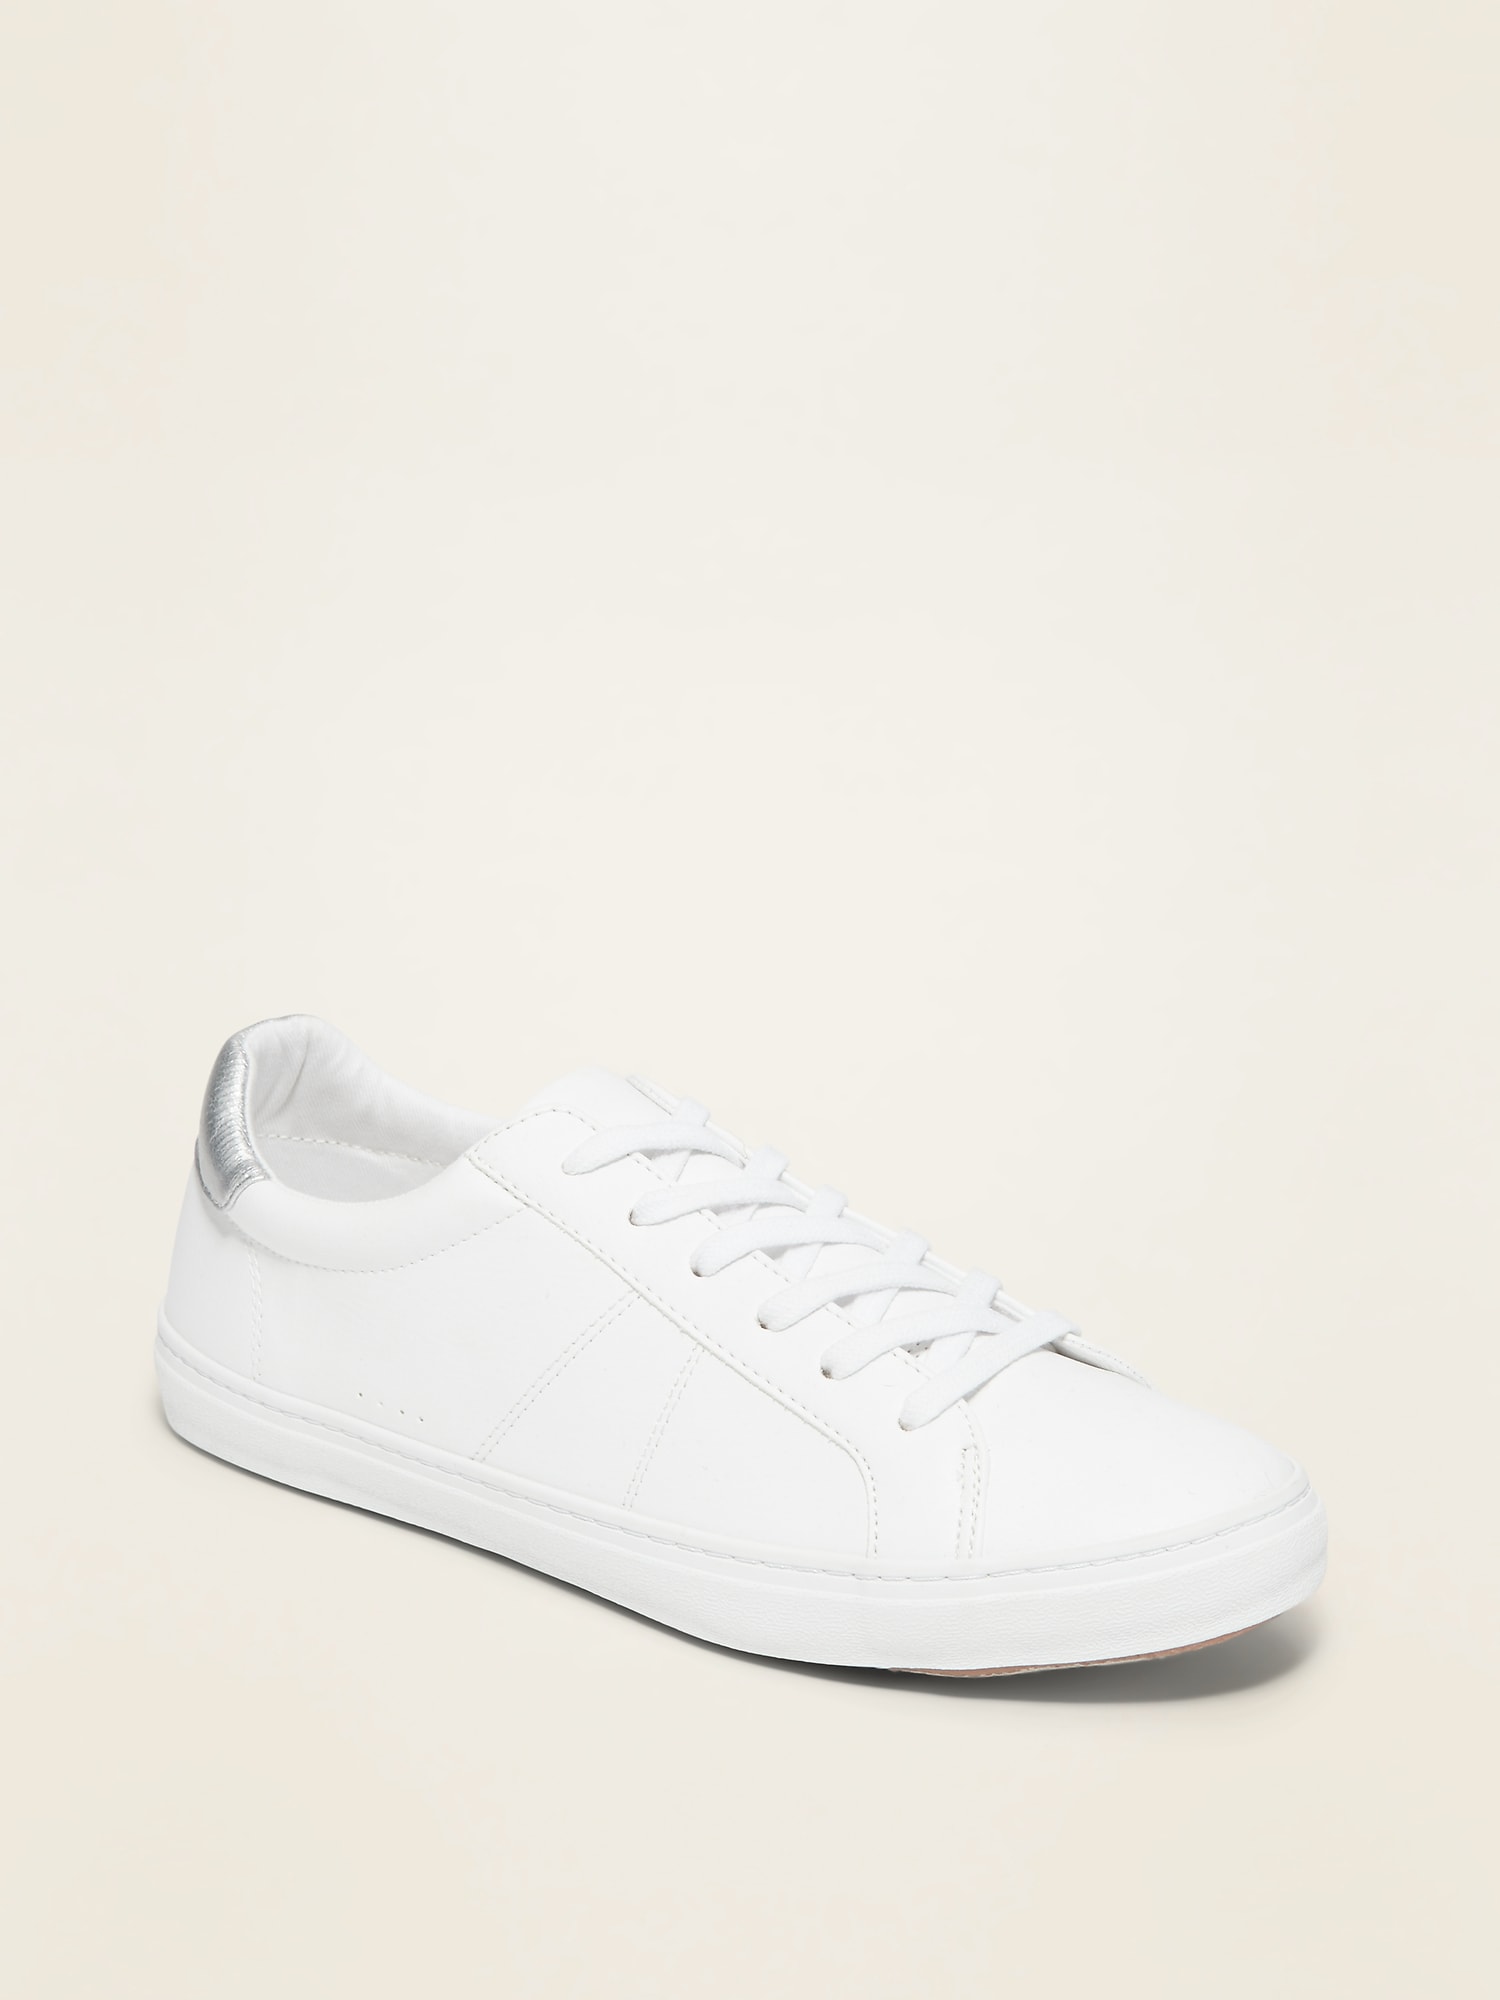 all leather sneakers womens